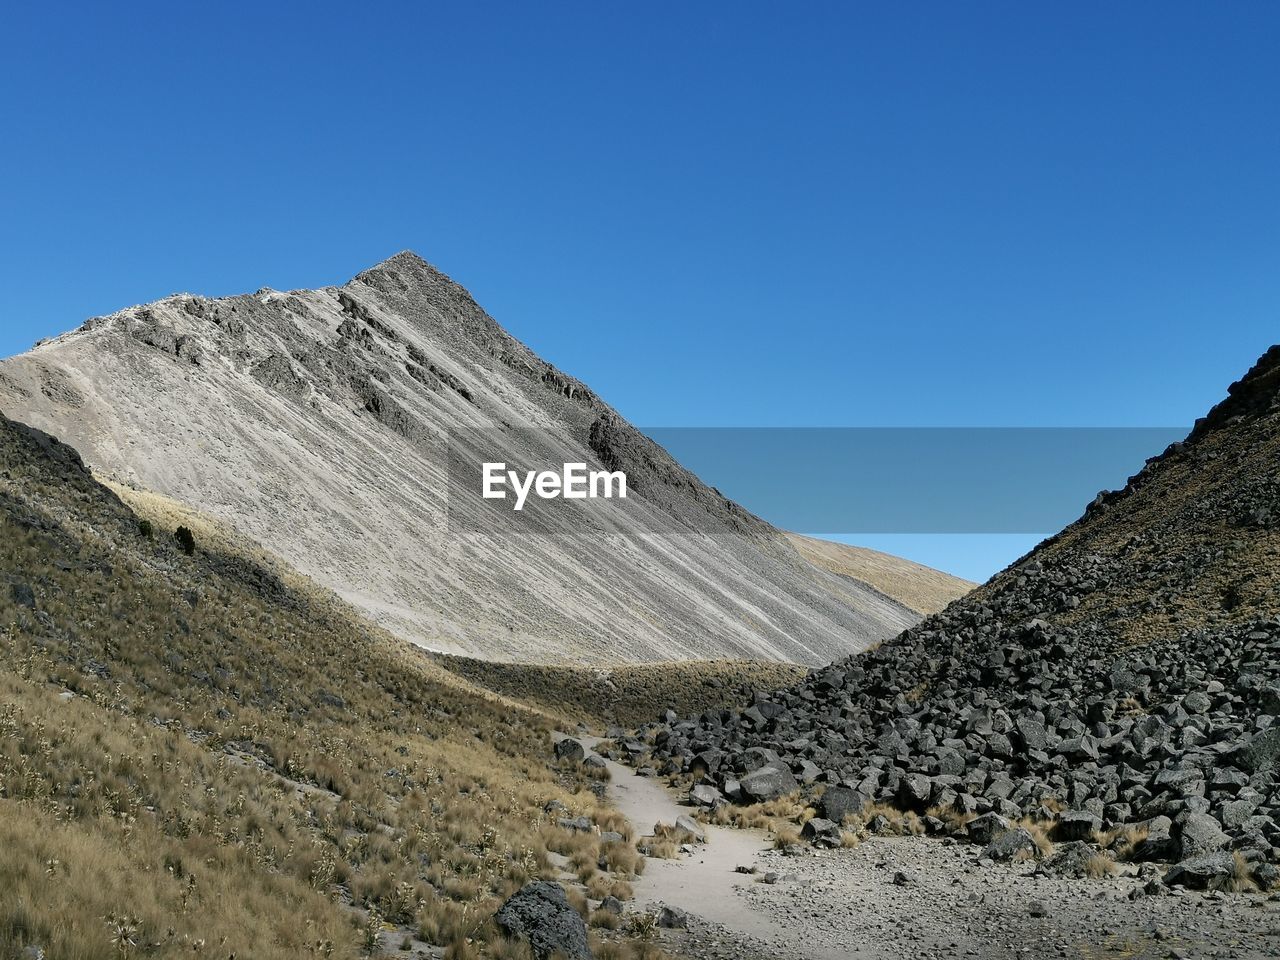 PANORAMIC VIEW OF MOUNTAIN RANGE AGAINST CLEAR BLUE SKY